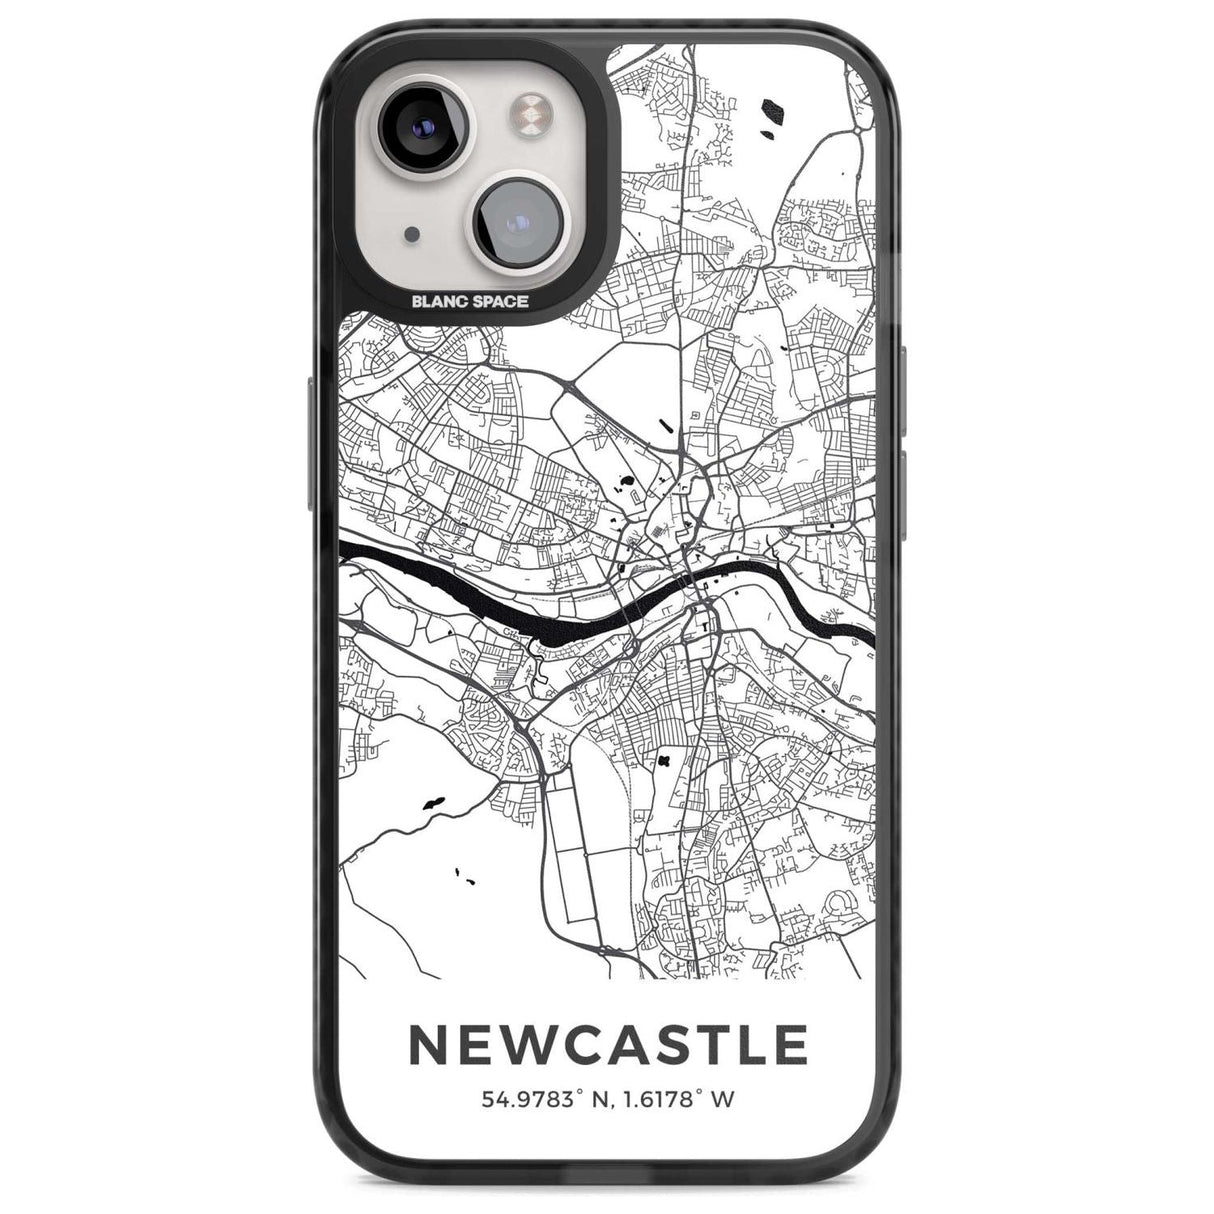 Map of Newcastle, England Phone Case iPhone 15 Plus / Magsafe Black Impact Case,iPhone 15 / Magsafe Black Impact Case,iPhone 14 Plus / Magsafe Black Impact Case,iPhone 14 / Magsafe Black Impact Case,iPhone 13 / Magsafe Black Impact Case Blanc Space